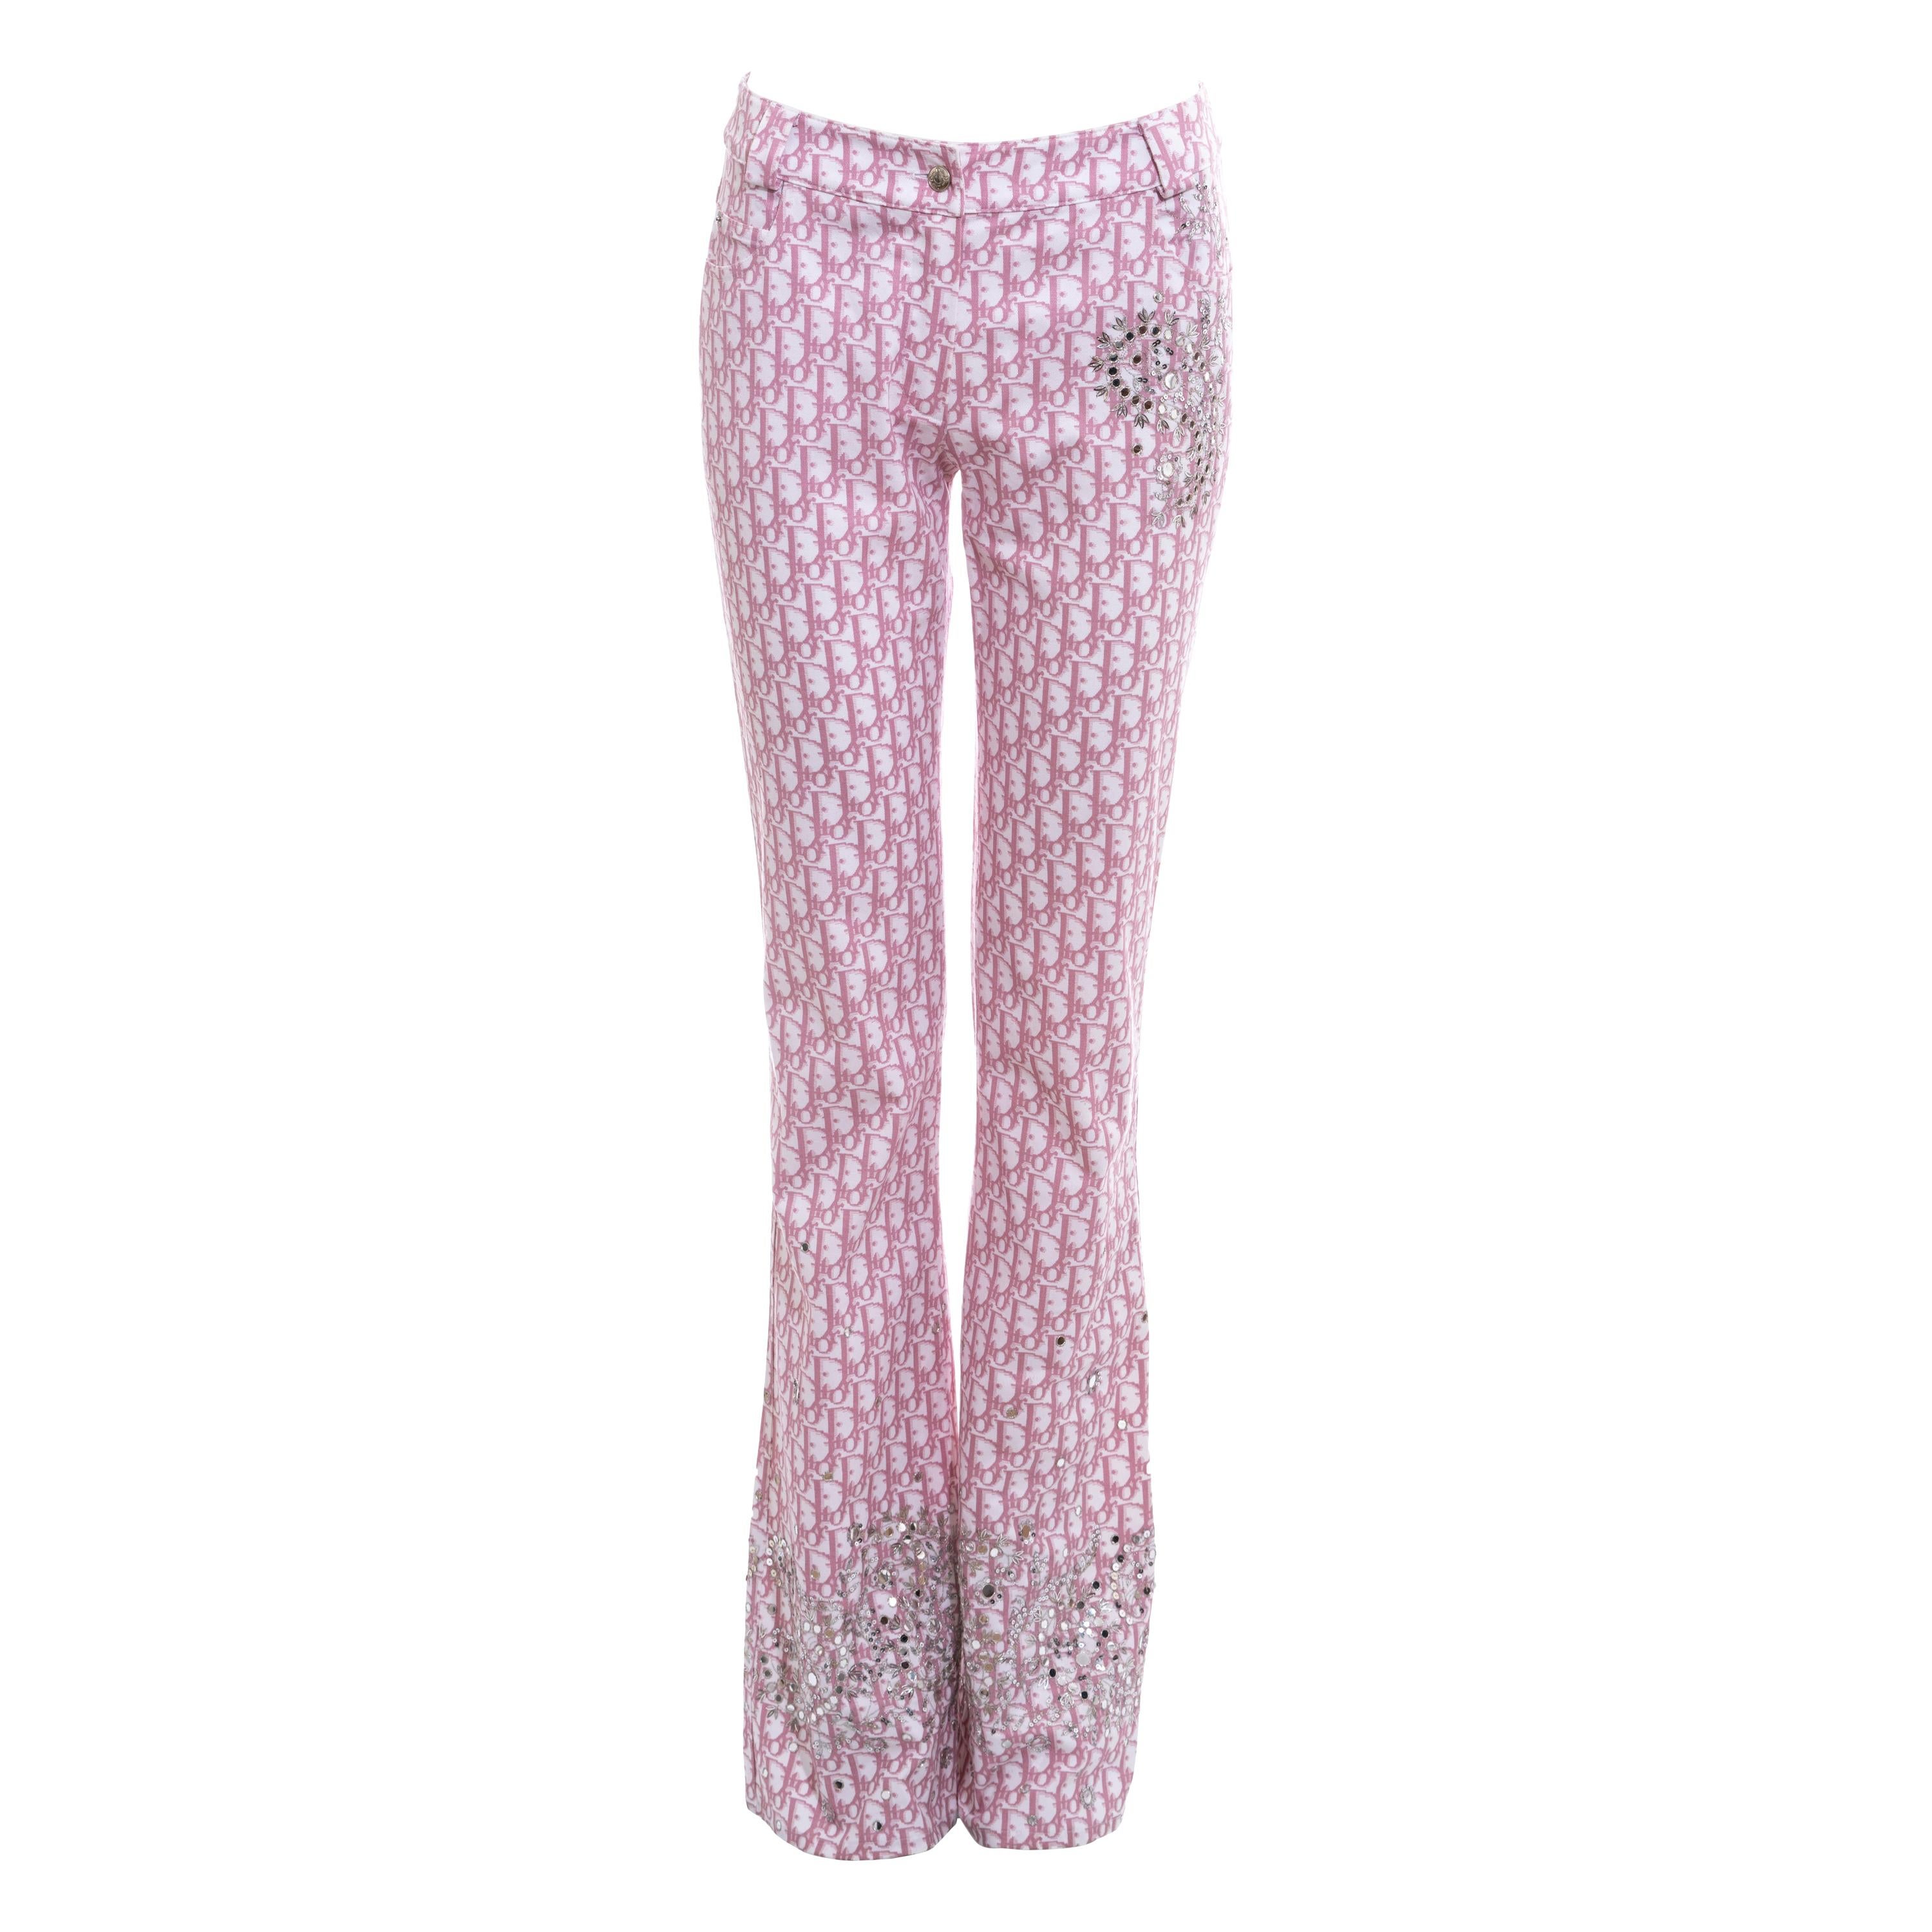 Christian Dior by John Galliano baby pink monogram embellished pants, ss 2004